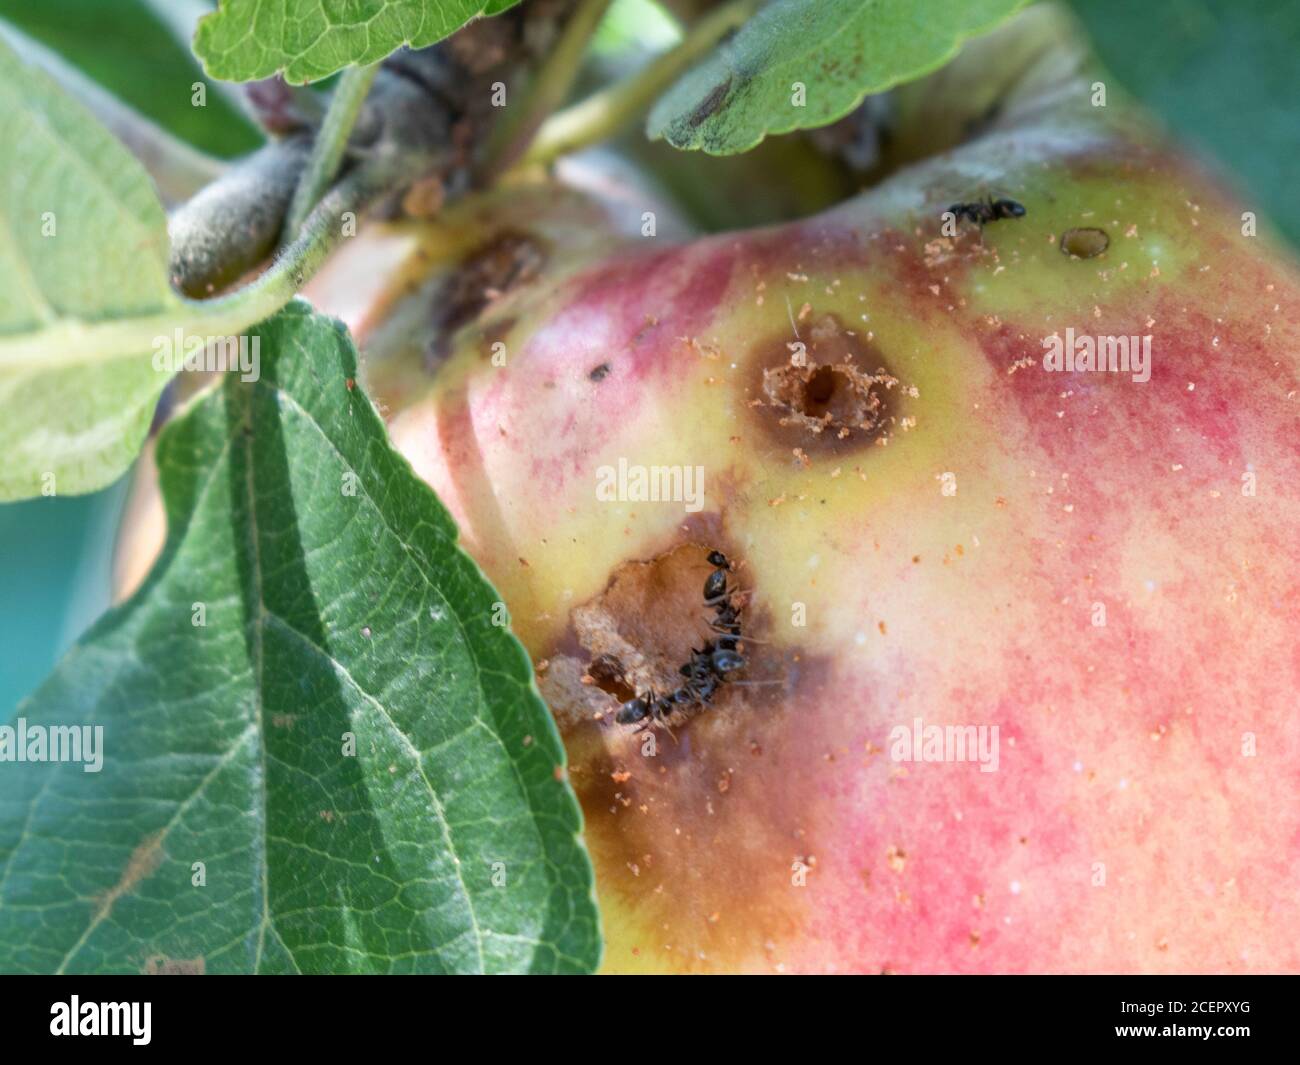 Close up of apple damaged by a worm on a branch.  Malus domestica Stock Photo